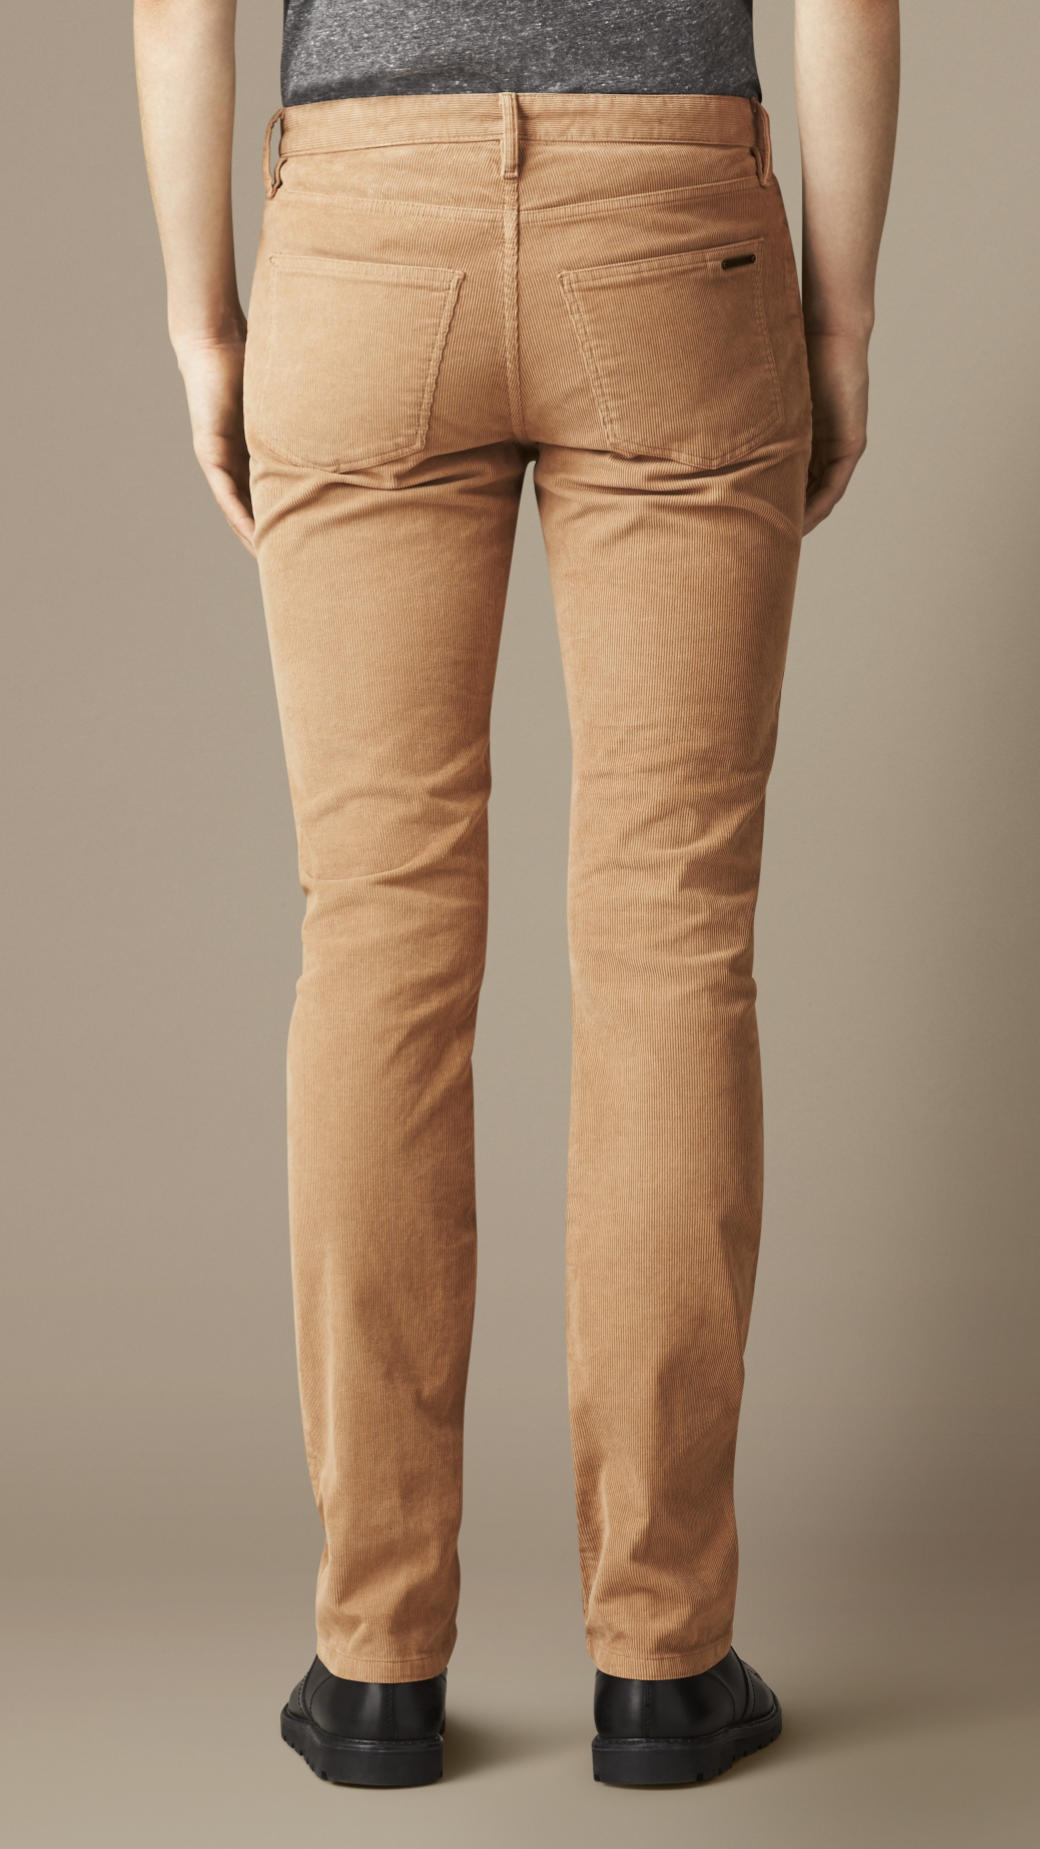 Lyst - Burberry Slim Fit Corduroy Trousers in Brown for Men